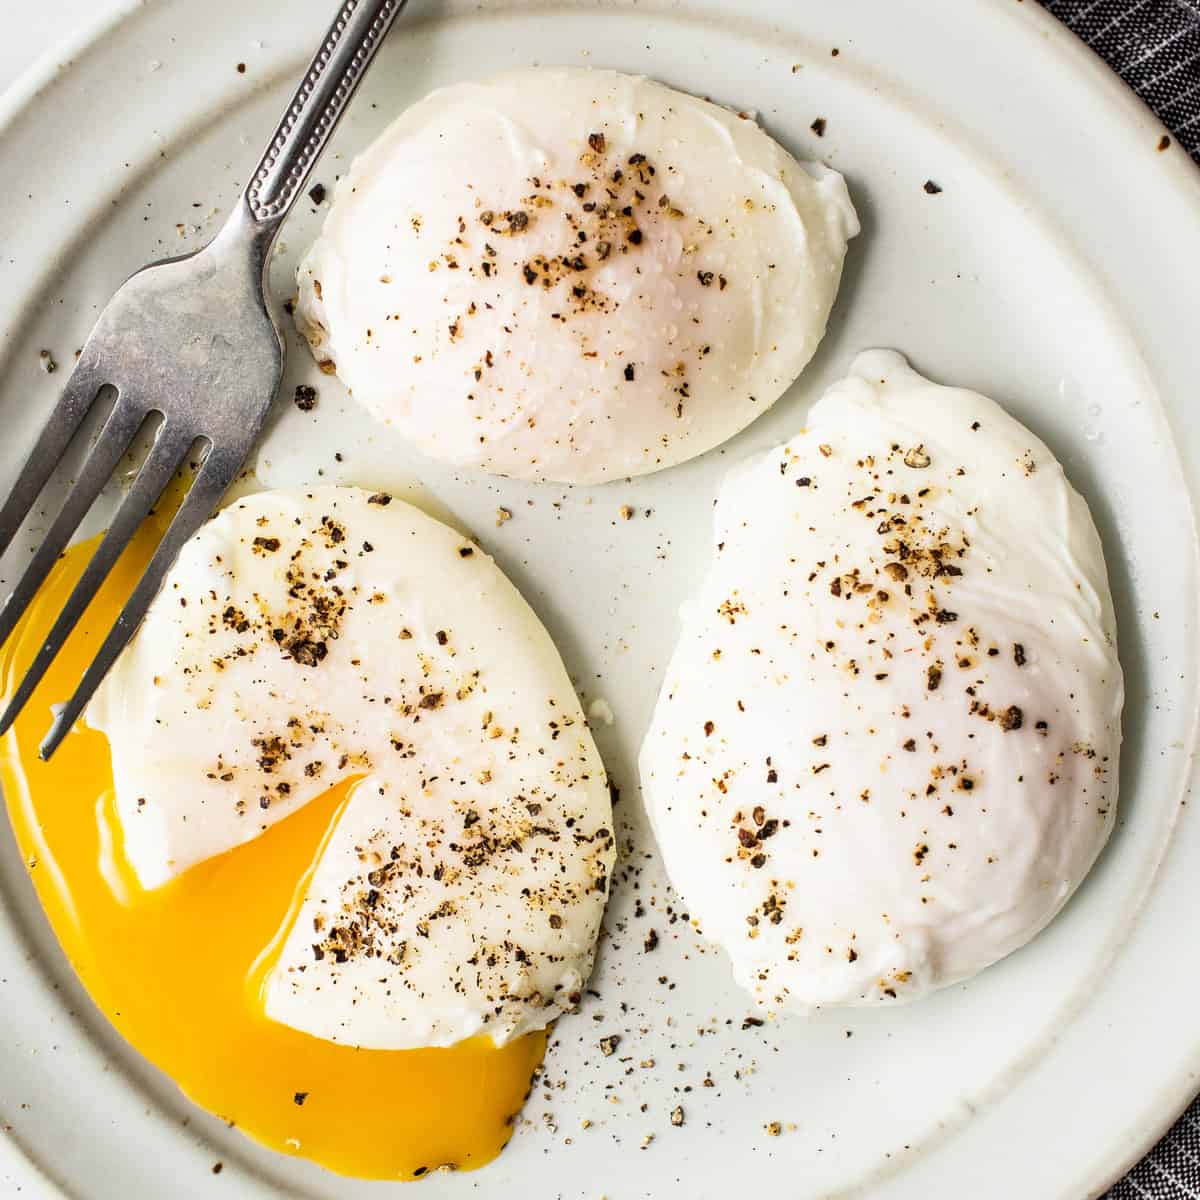 https://fitfoodiefinds.com/wp-content/uploads/2022/09/Poached-Eggs-sq.jpg